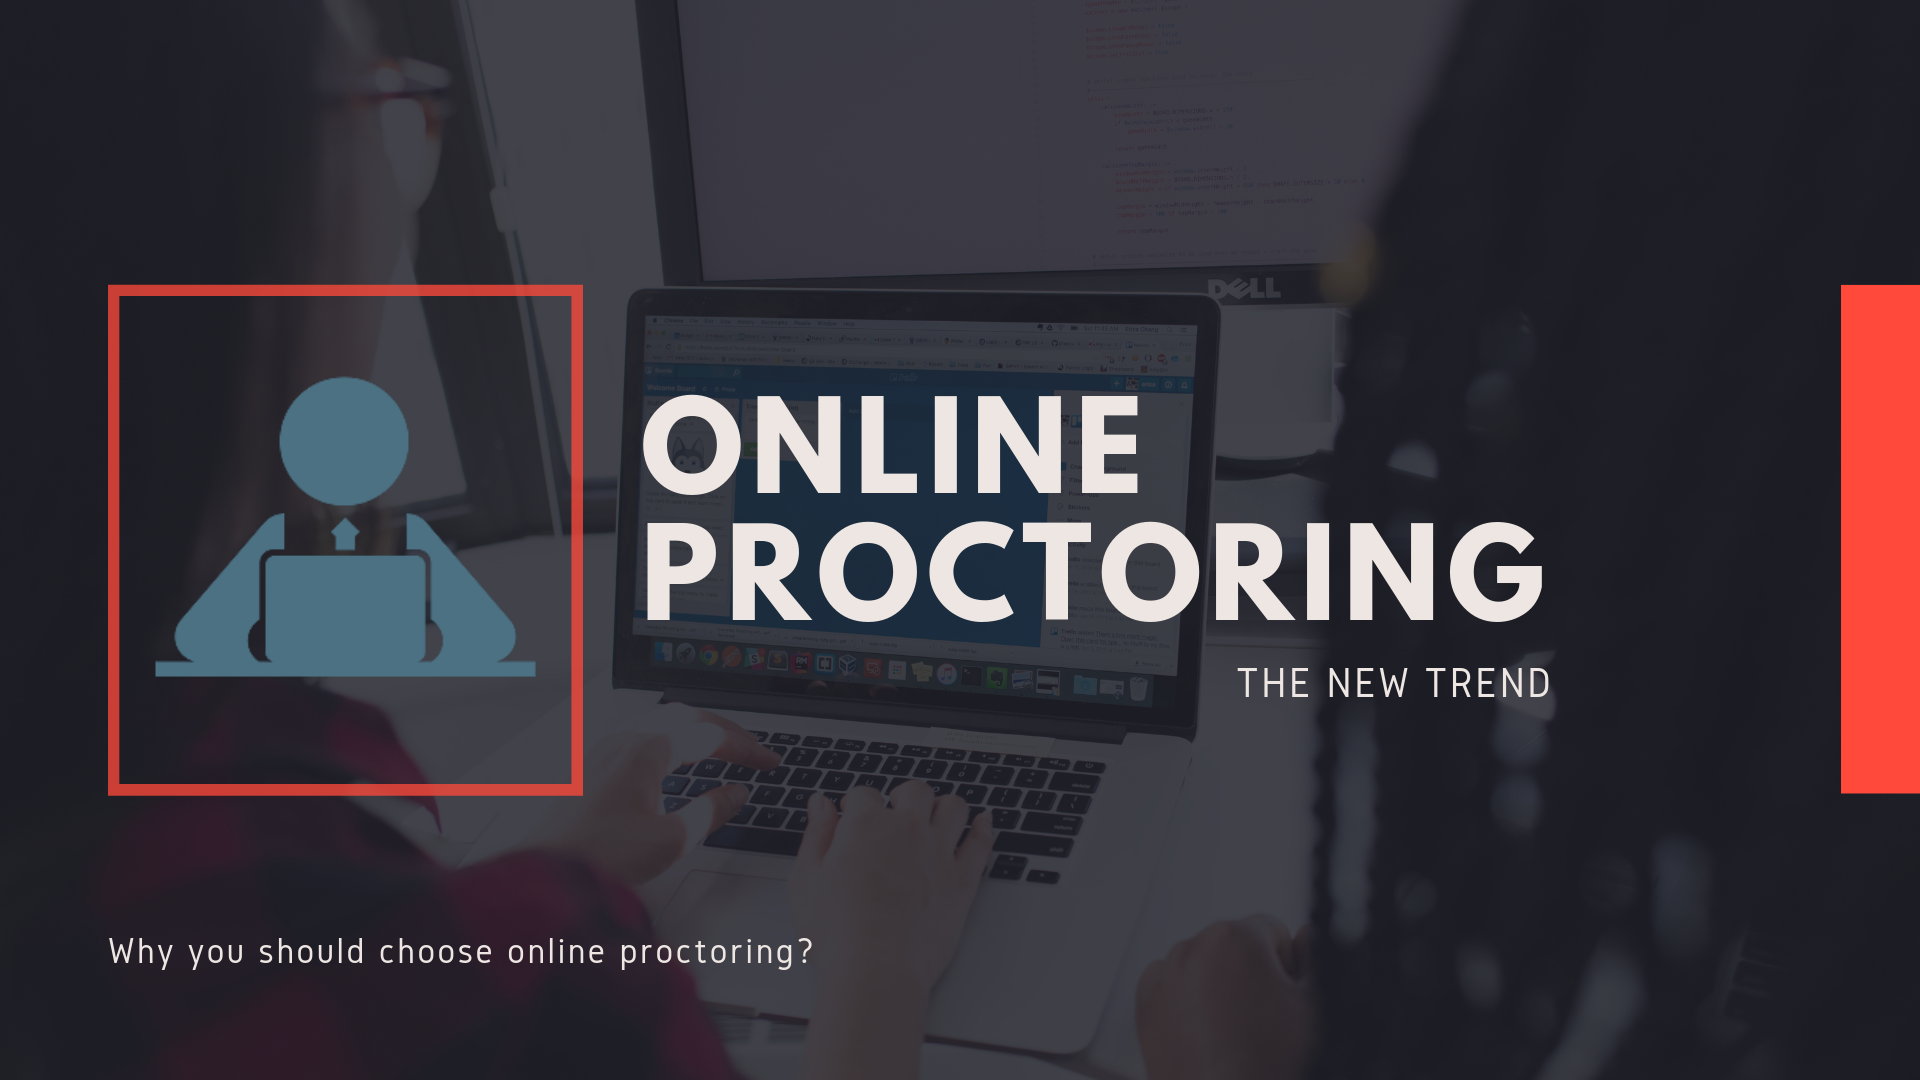 Online Proctoring is the new Trend